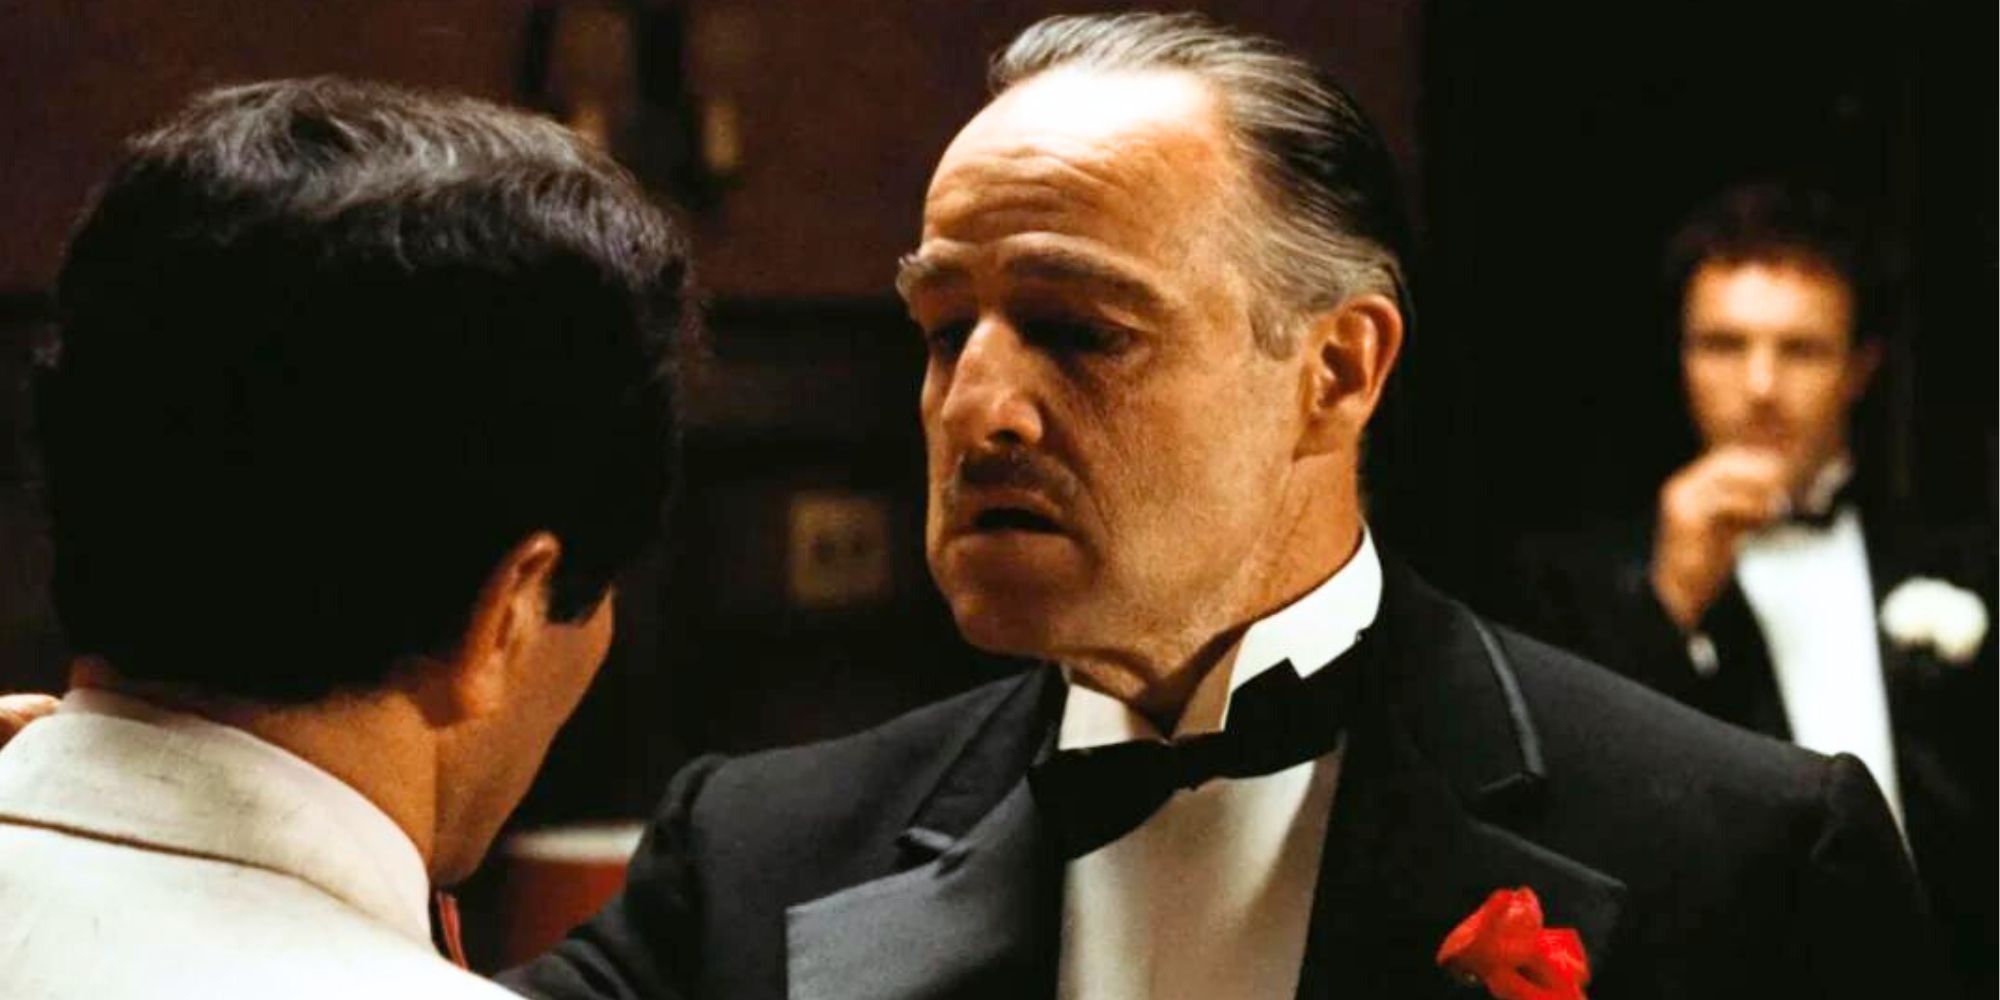 Vito Corleone, speaking to someone in The Godfather (1972)